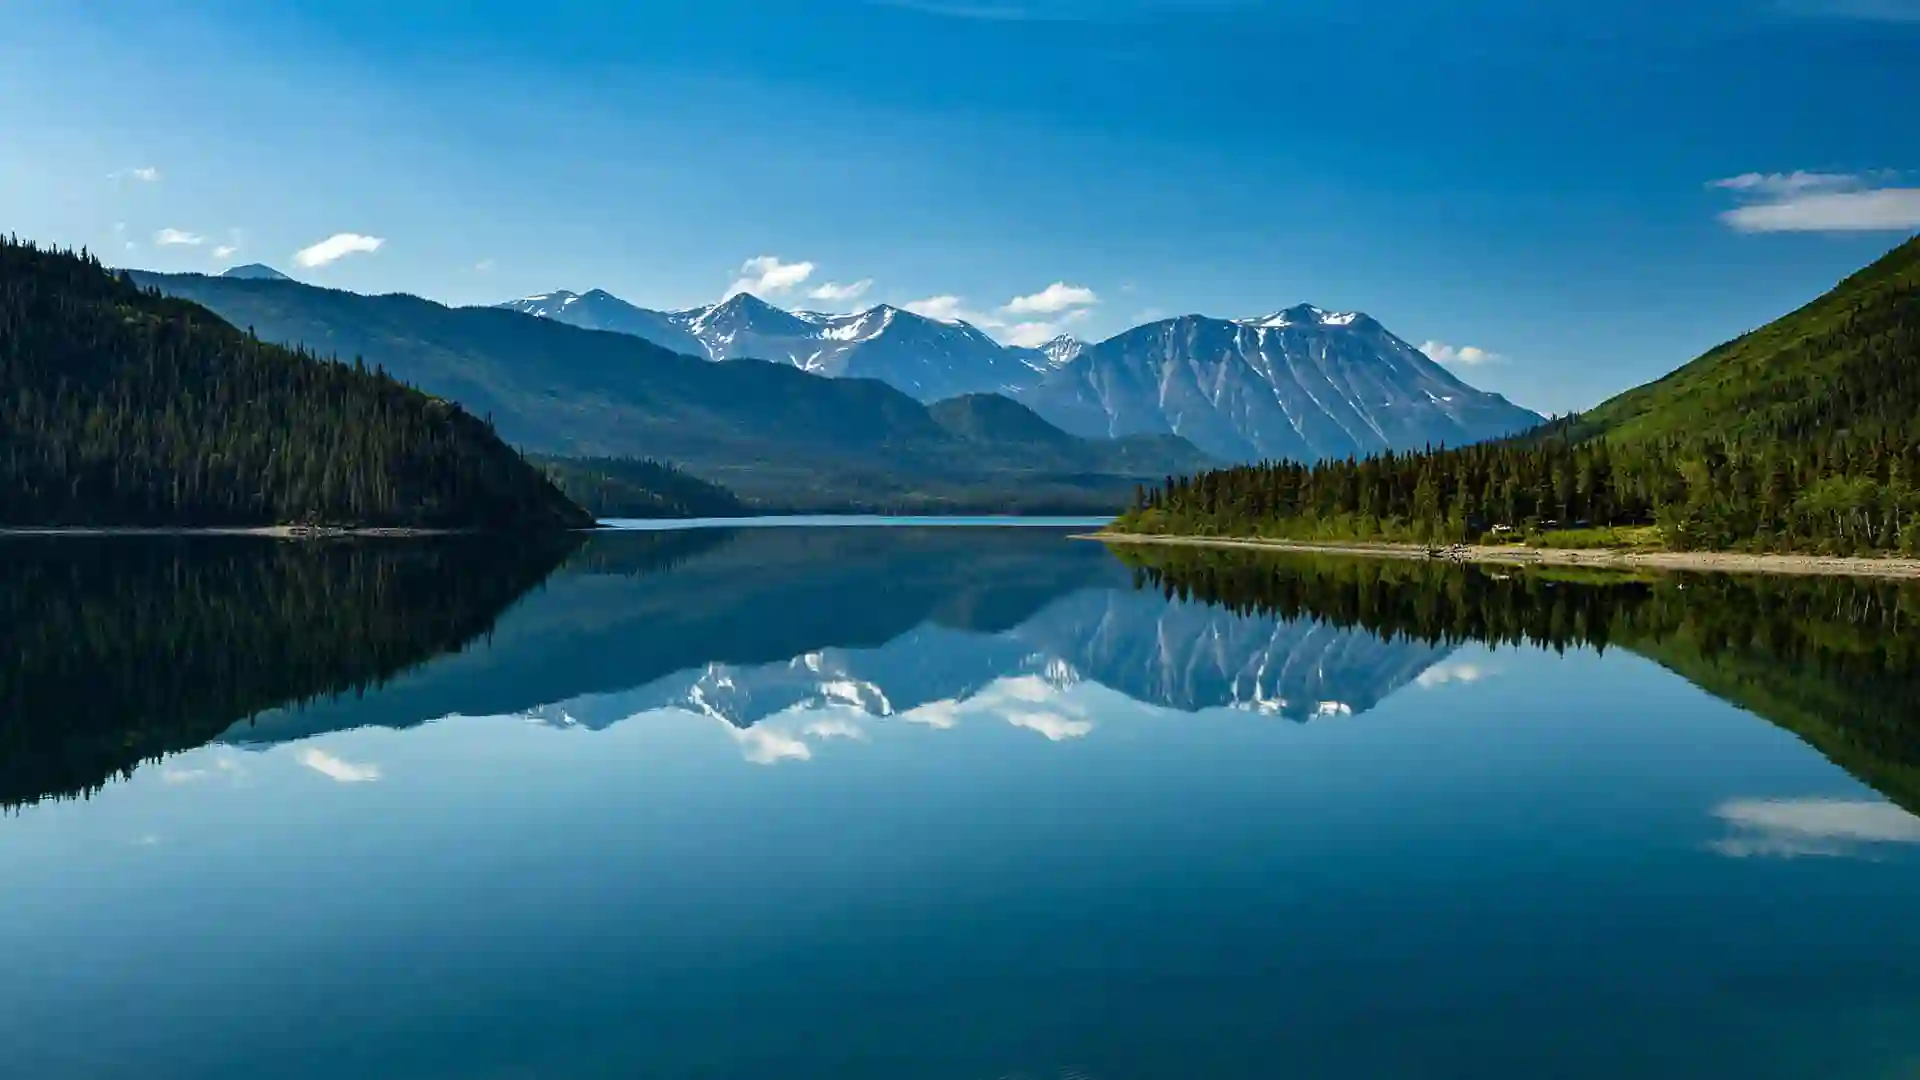 View of calm lake surrounded by lush and mountainous landscape in Canada.